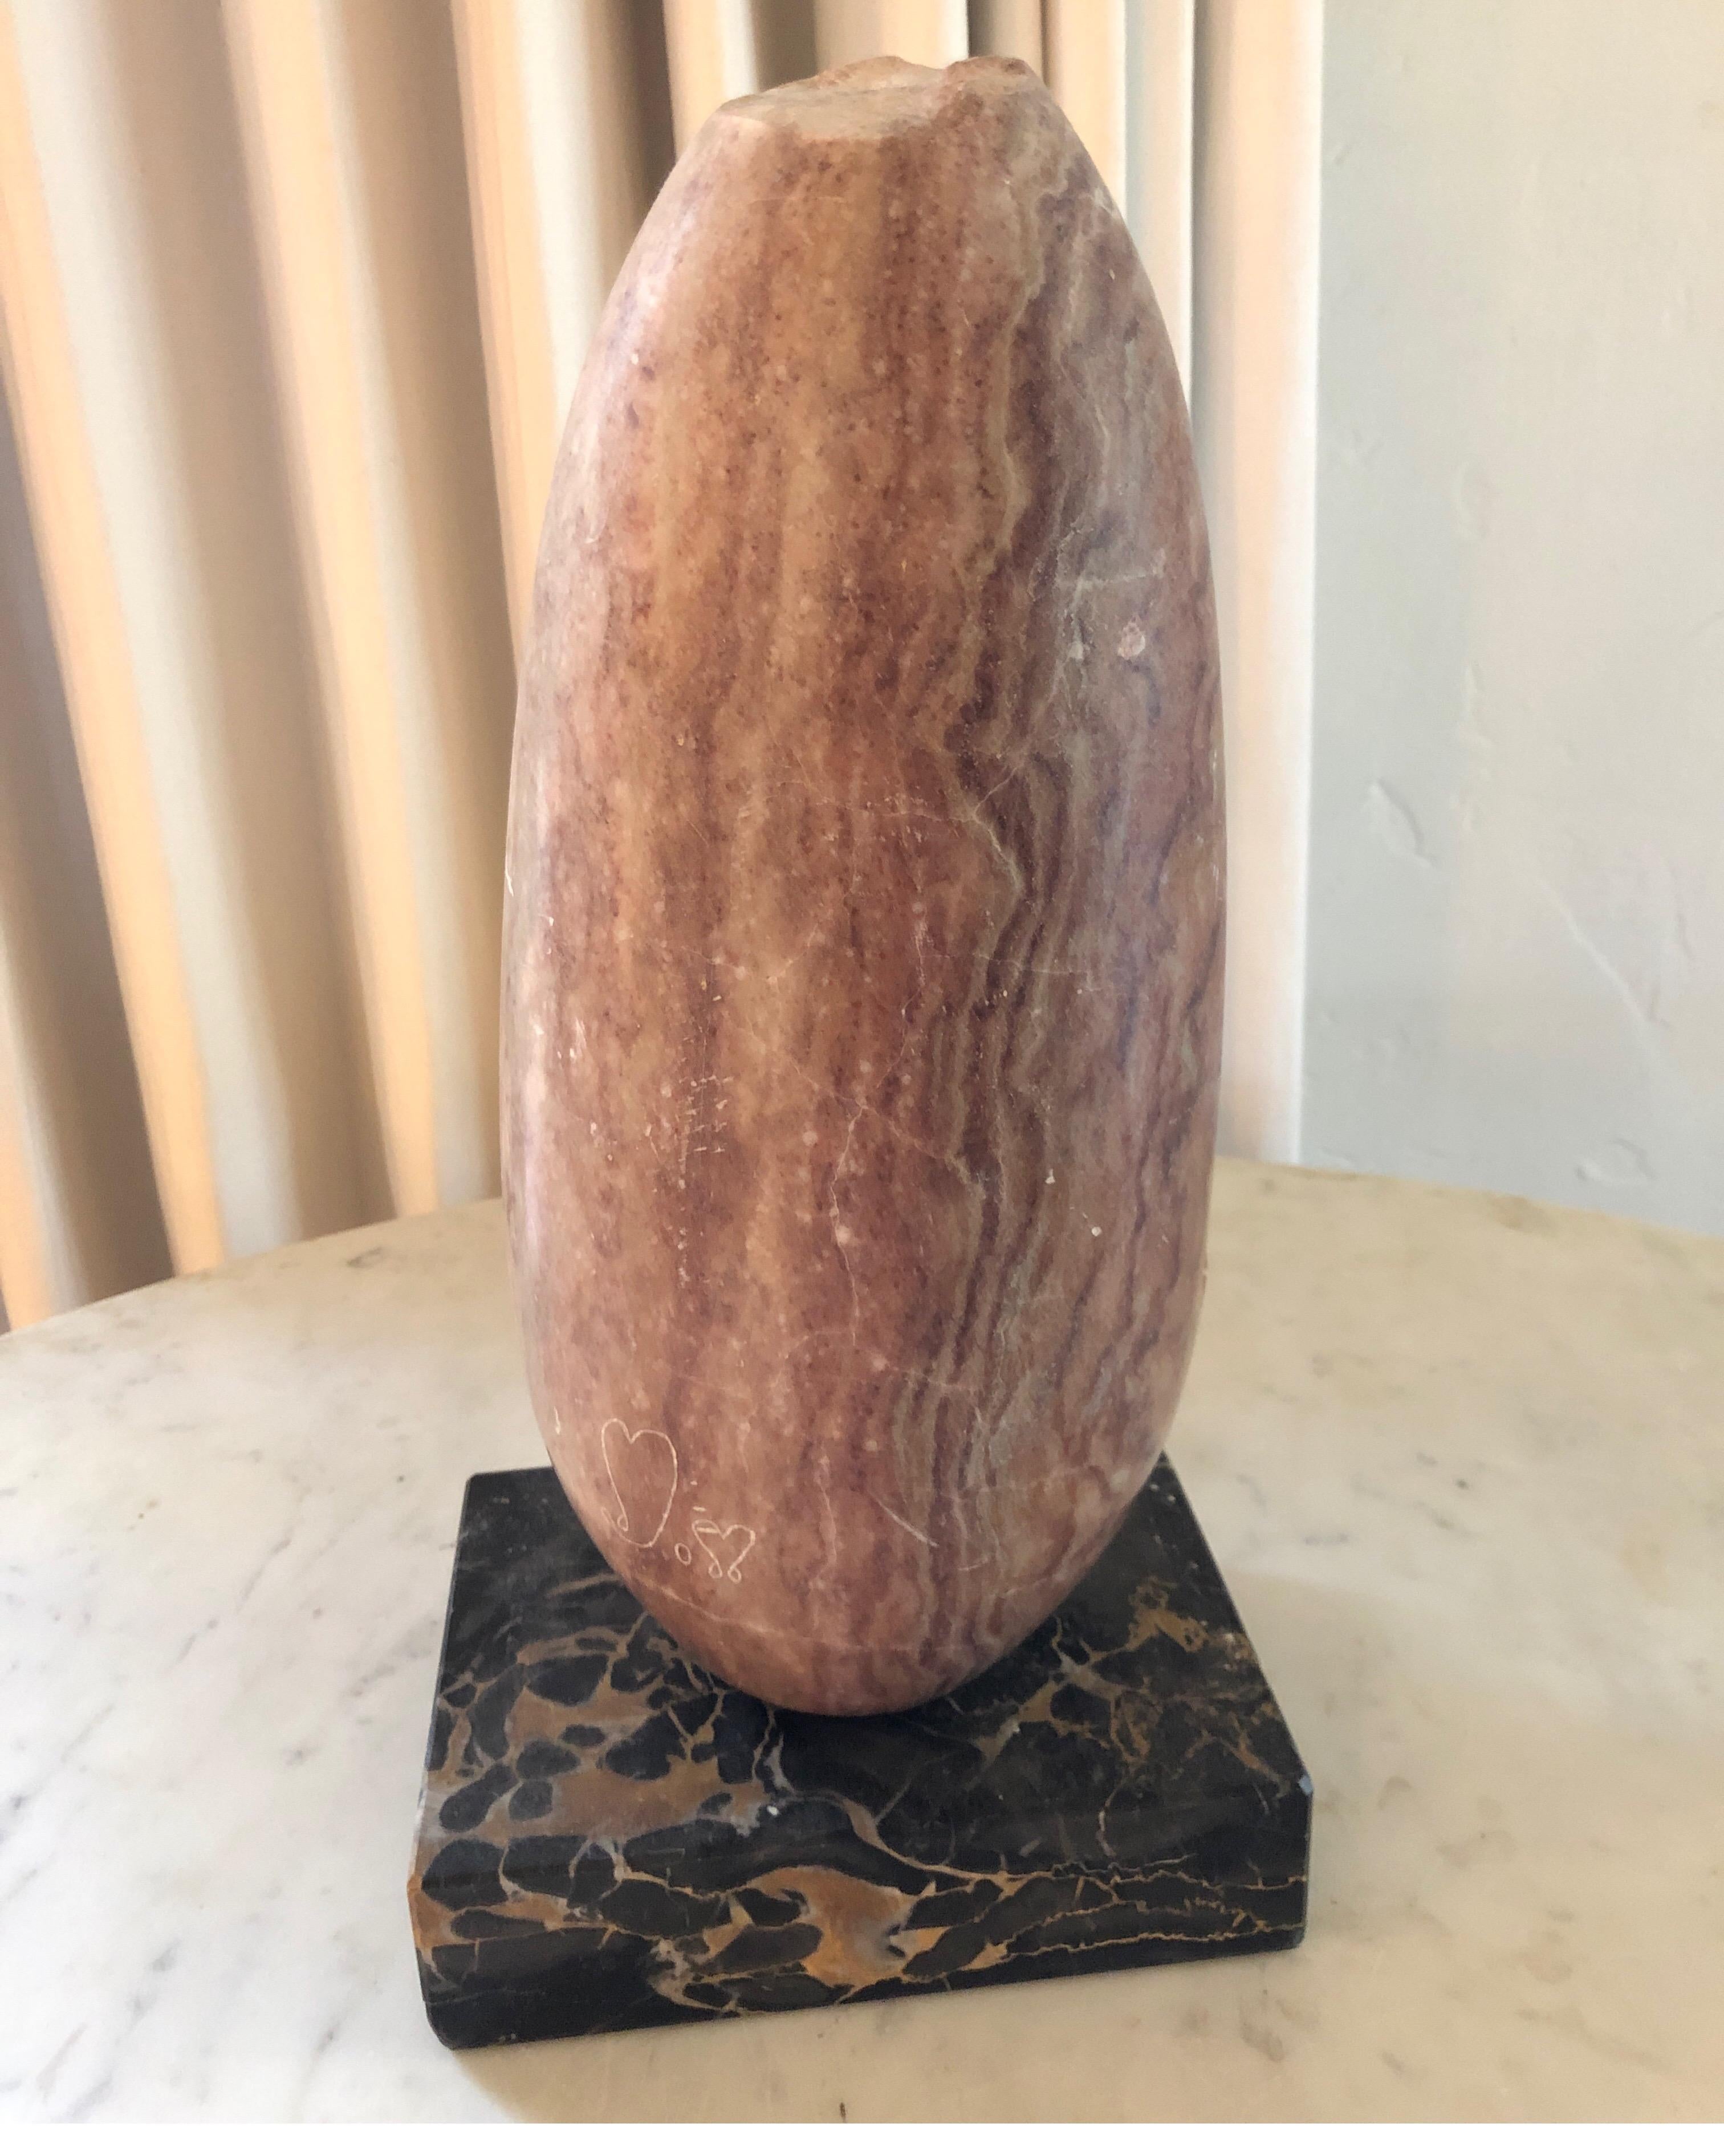 Vintage Yehuda Dodd Roth Signed Stone Sculpture In Fair Condition For Sale In Los Angeles, CA